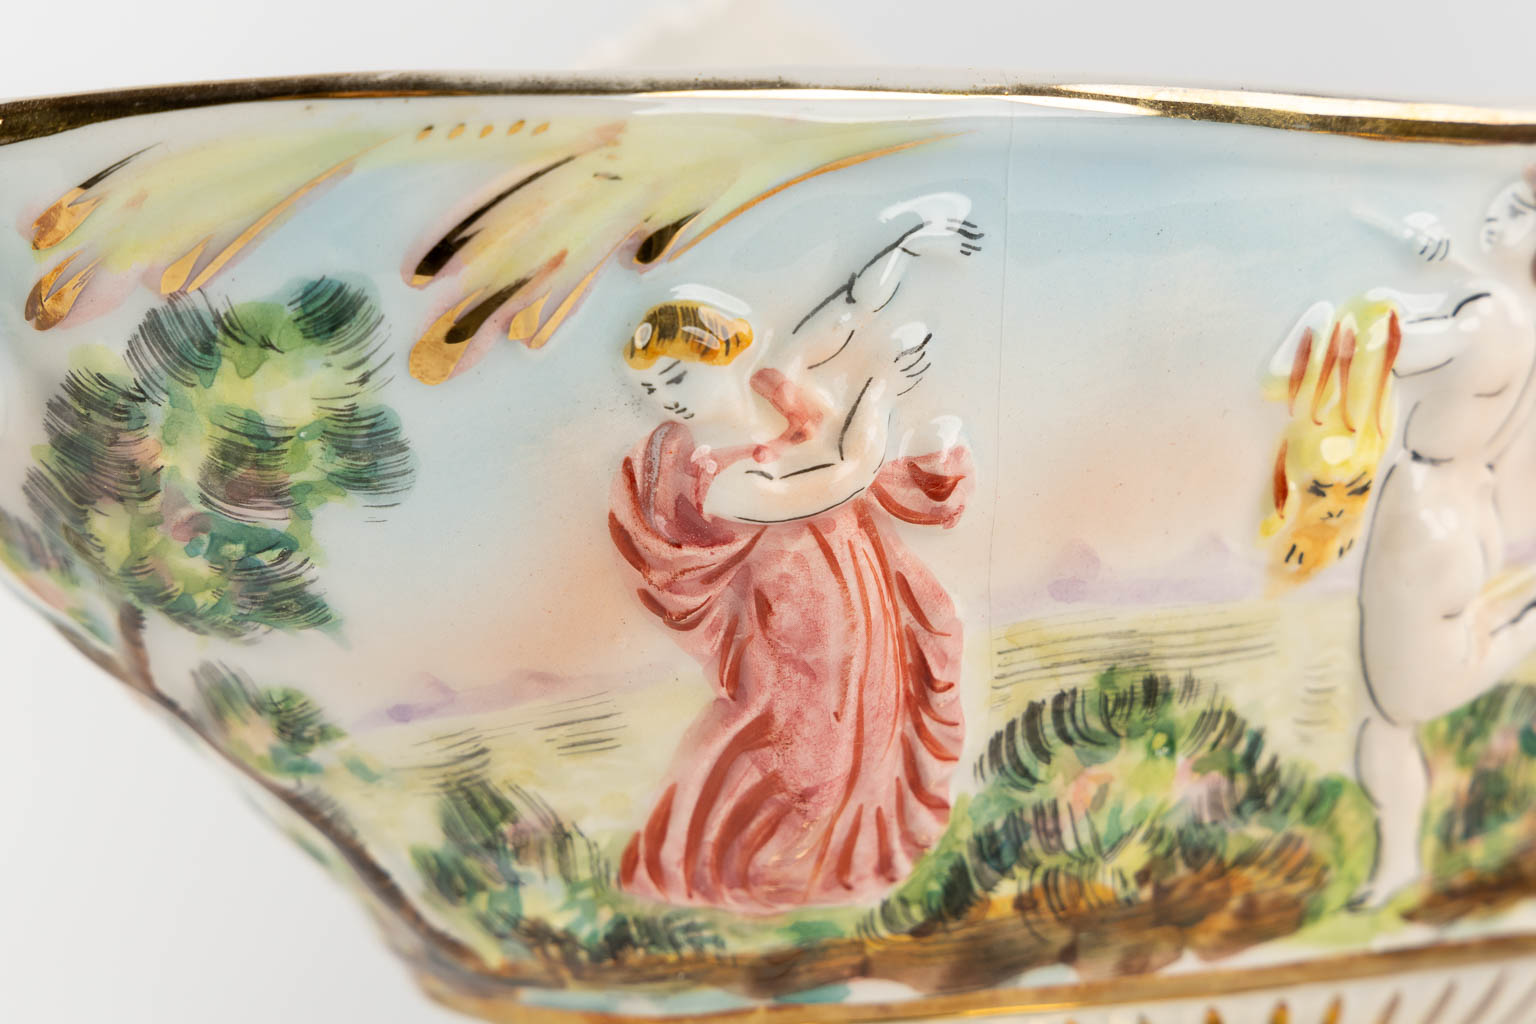 Six large bowls and vases, glazed faience, Capodimonte, Italy. (H:52 x D:23 cm) - Image 6 of 16